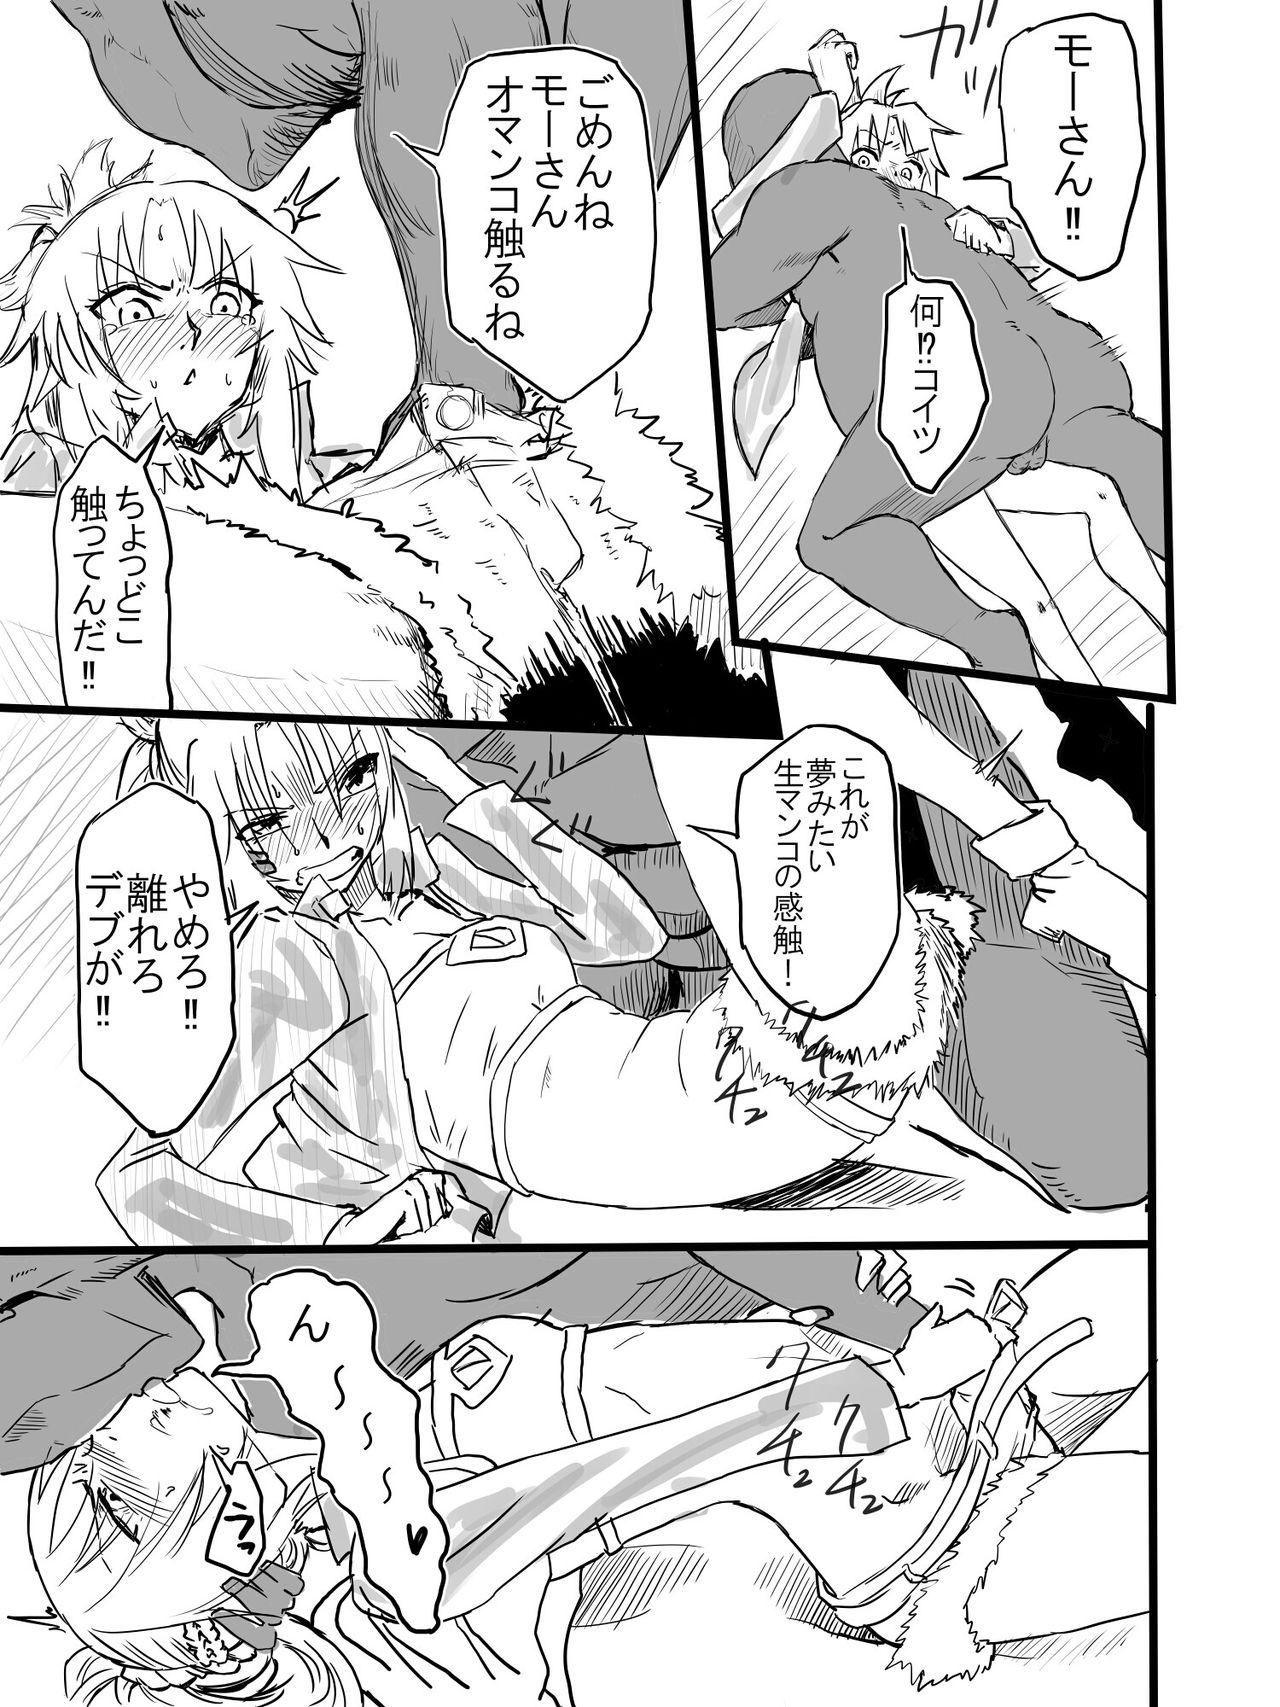 Ball Busting Tousouchuu in Chaldea - Fate grand order Hot Teen - Page 7